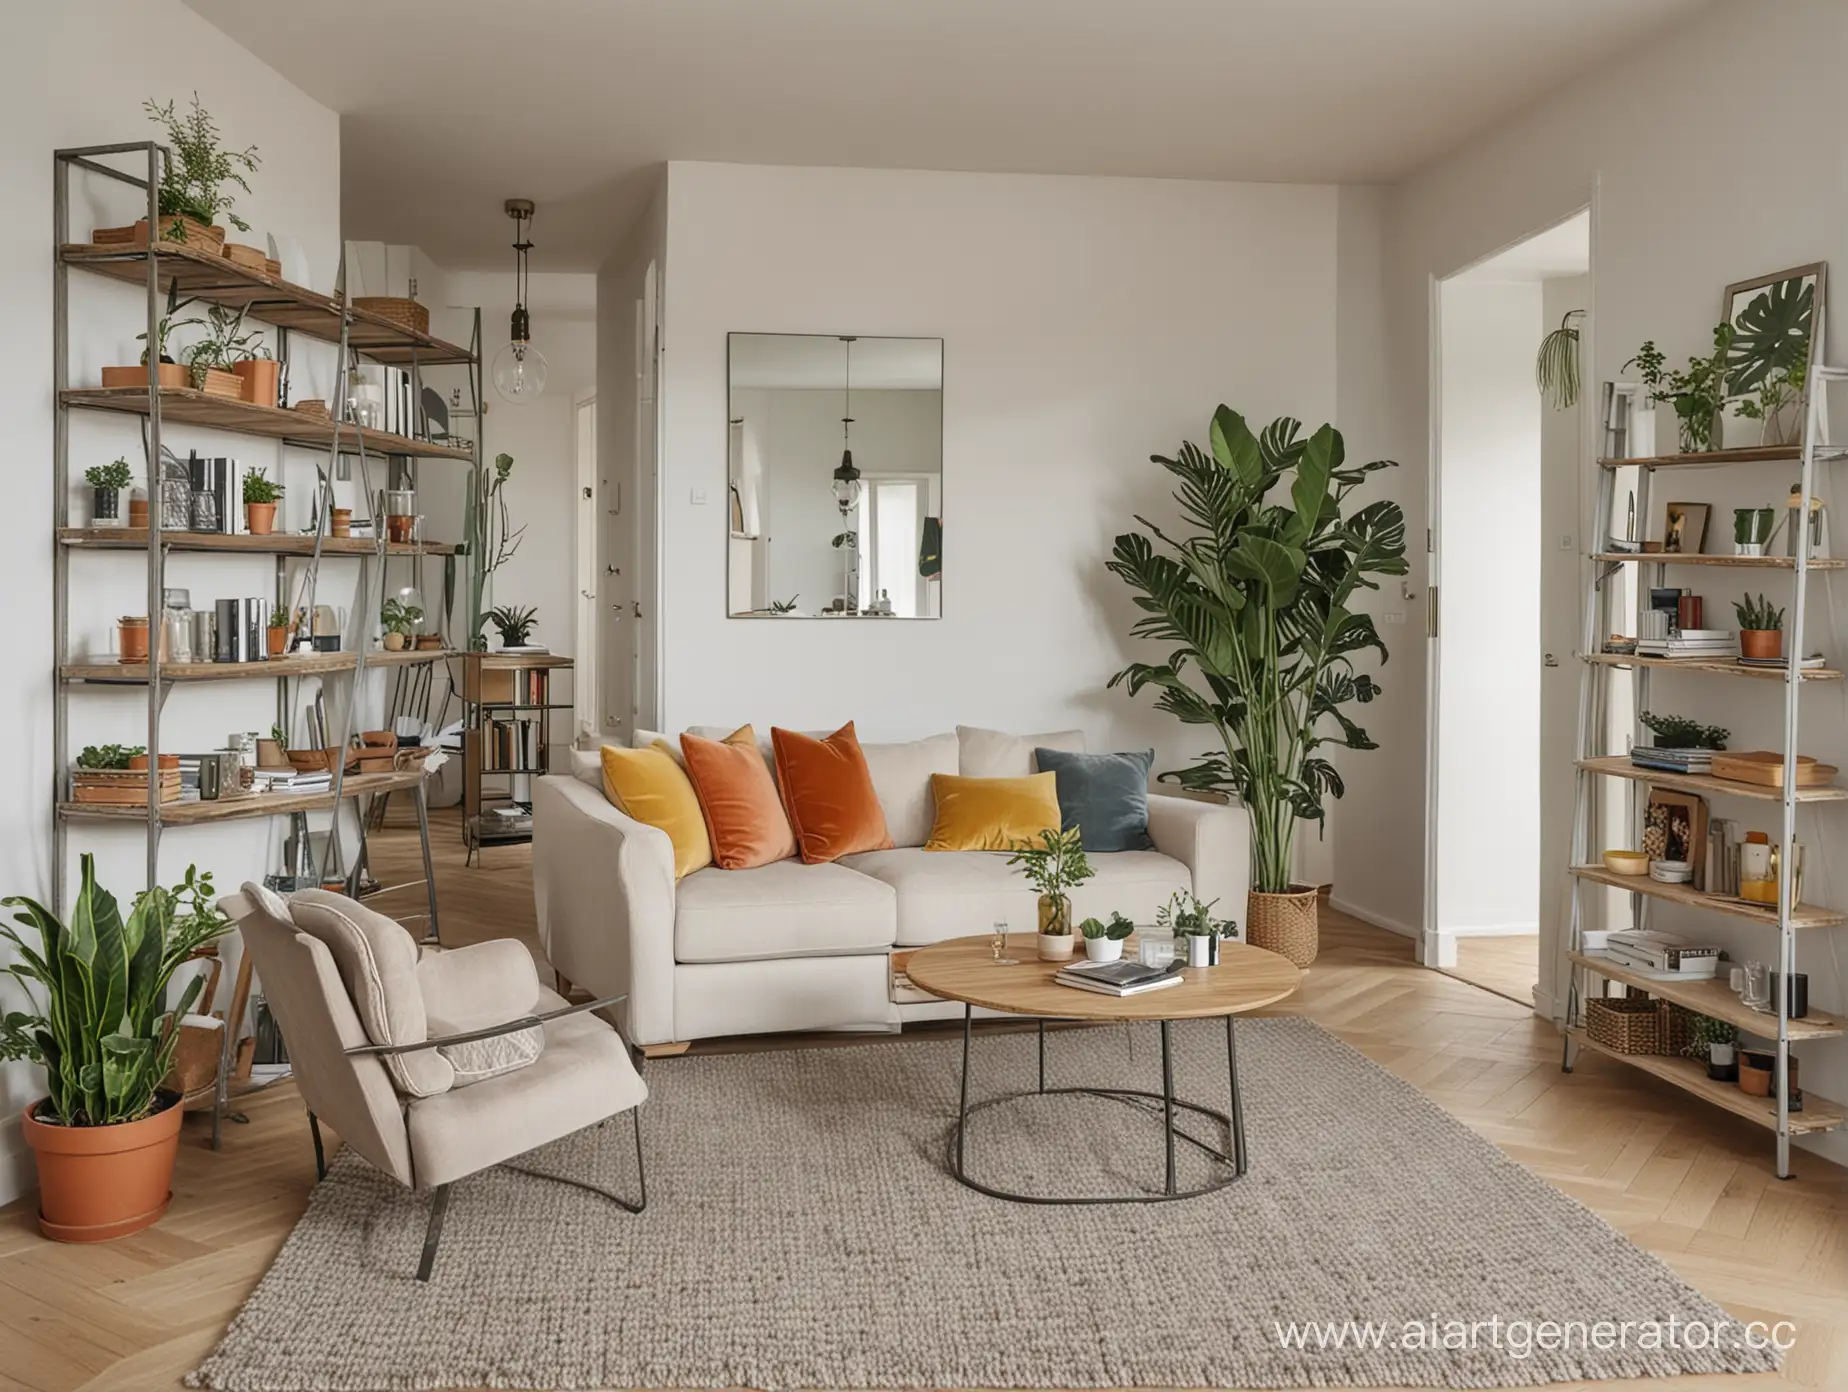 Cozy-Living-Room-Interior-with-Table-Sofa-Armchair-and-More